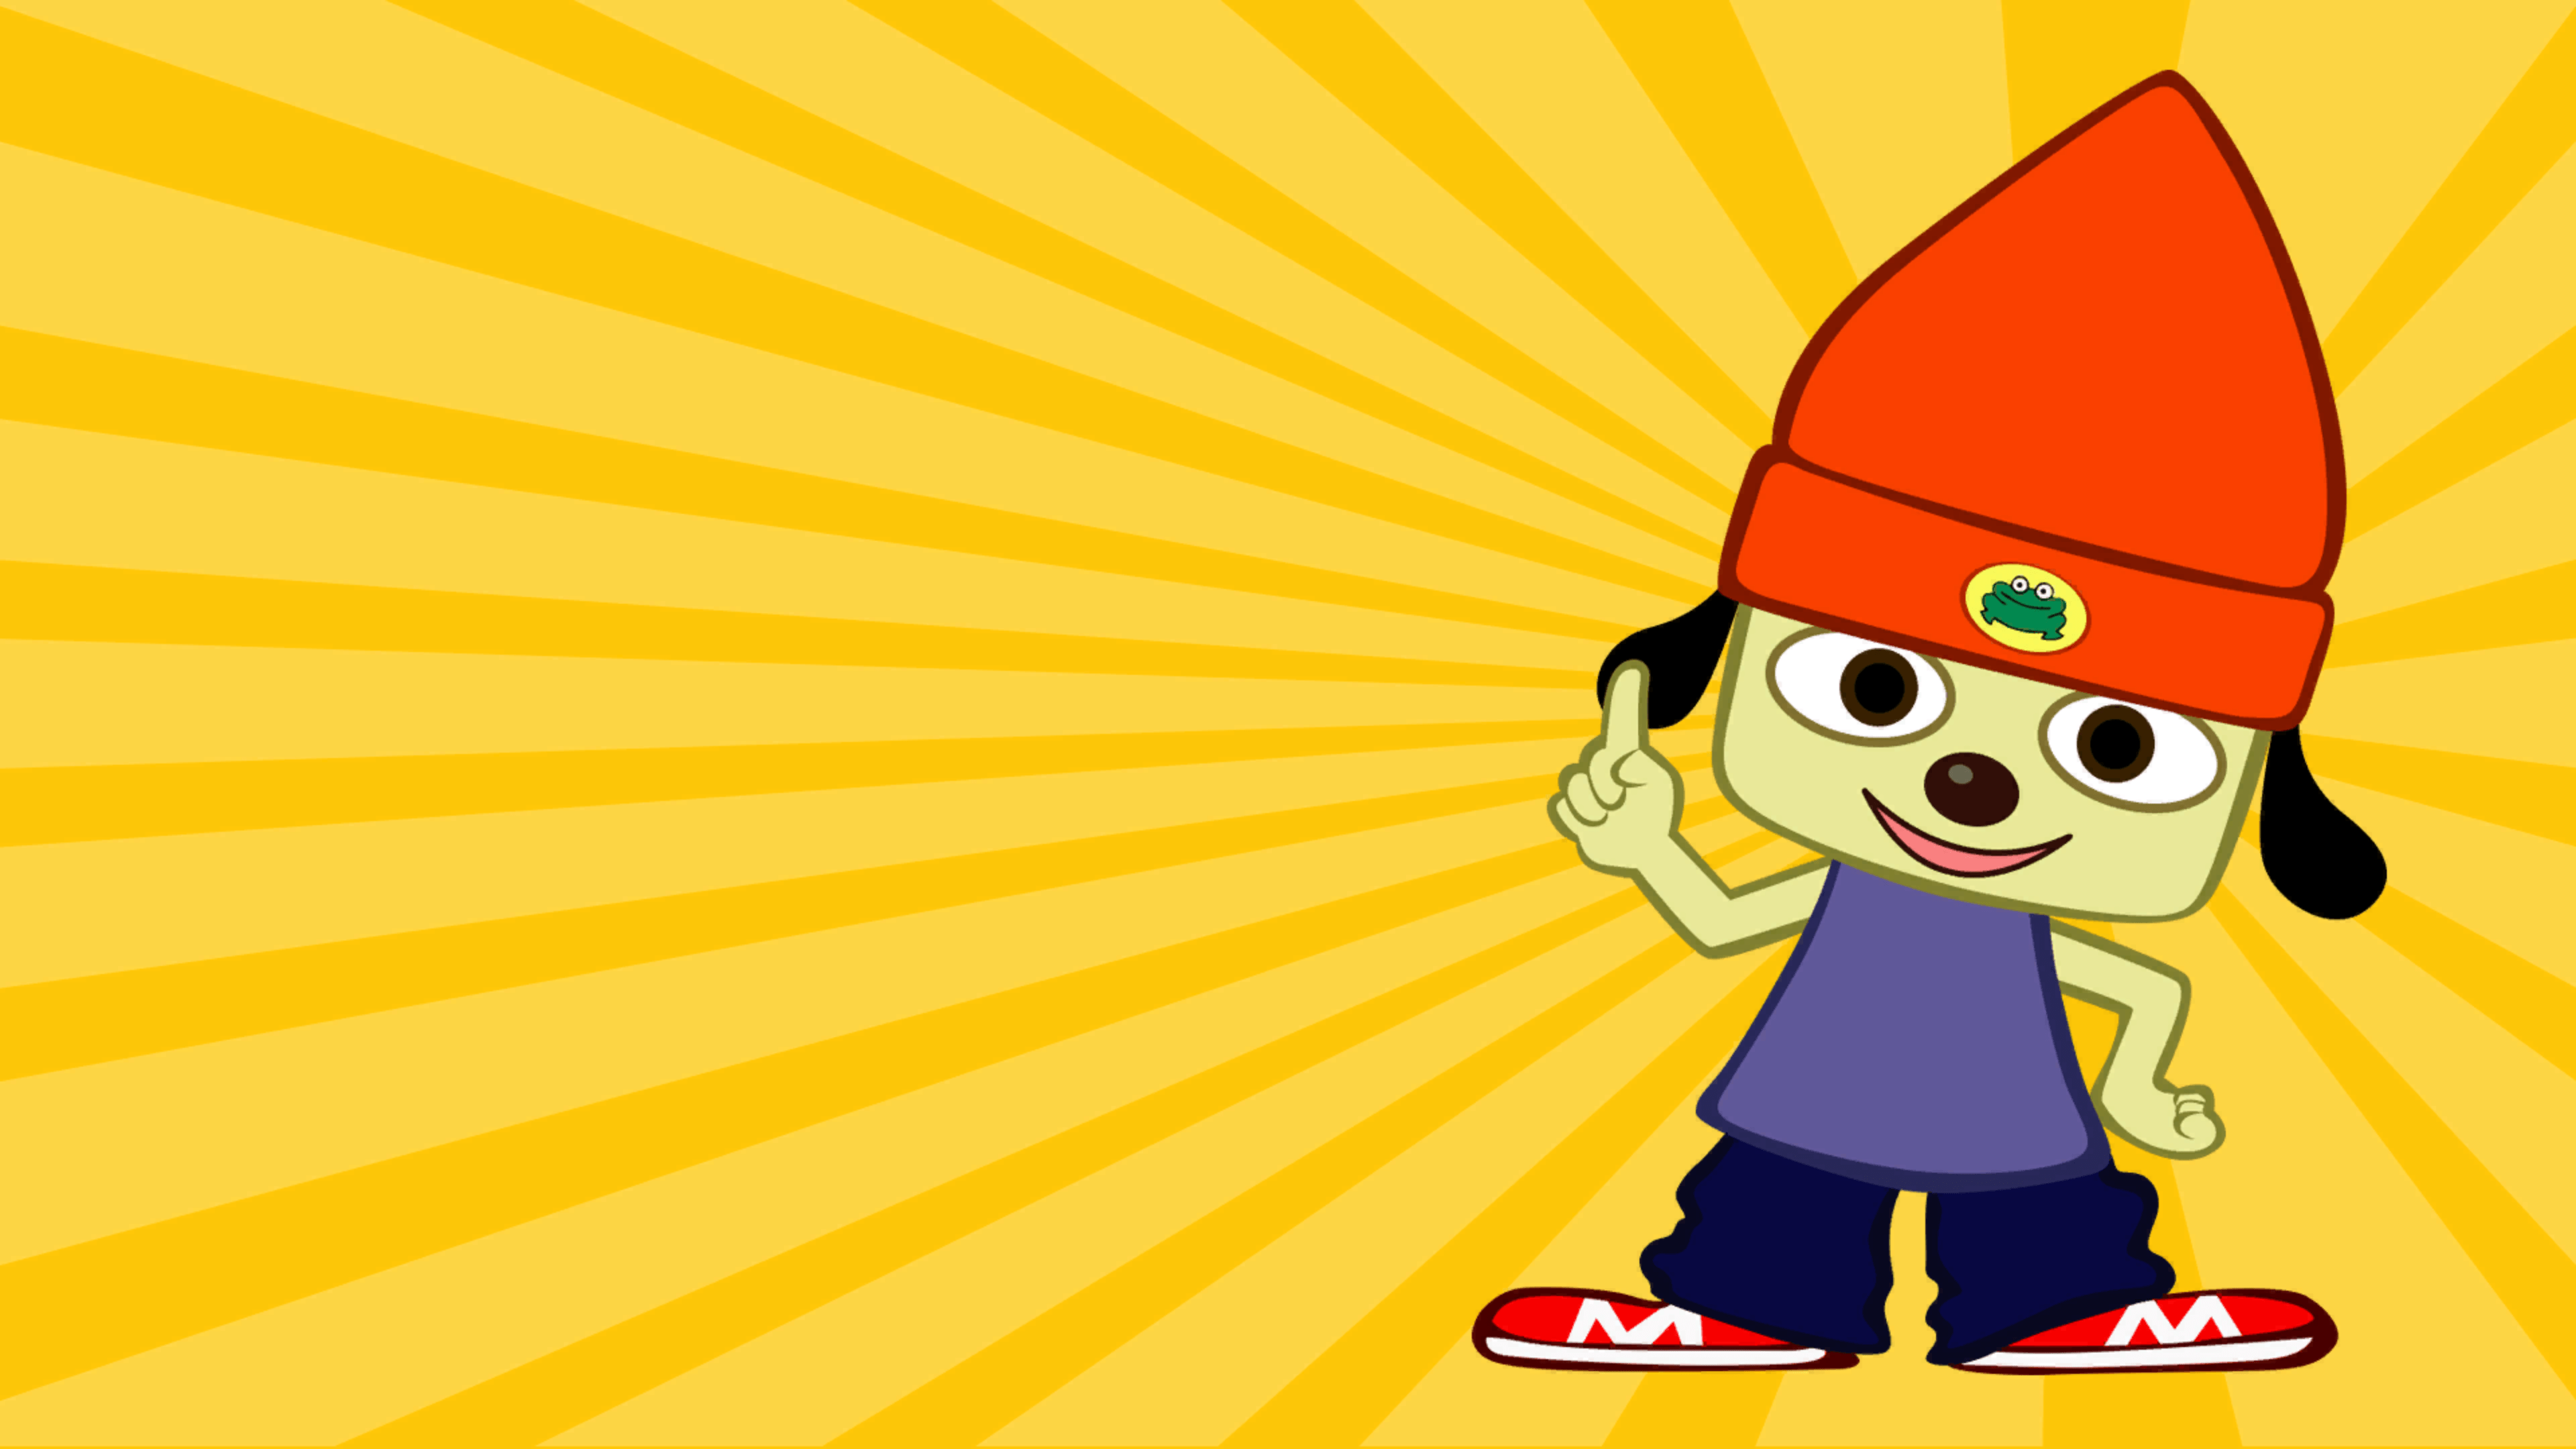 PaRappa the Rapper] [Screenshot] Wallpaper 4K and 1080P. #Playstation4 #PS4 #Sony #videogames #playstation #gamer #game. Japan graphic design, Rapper, Wallpaper